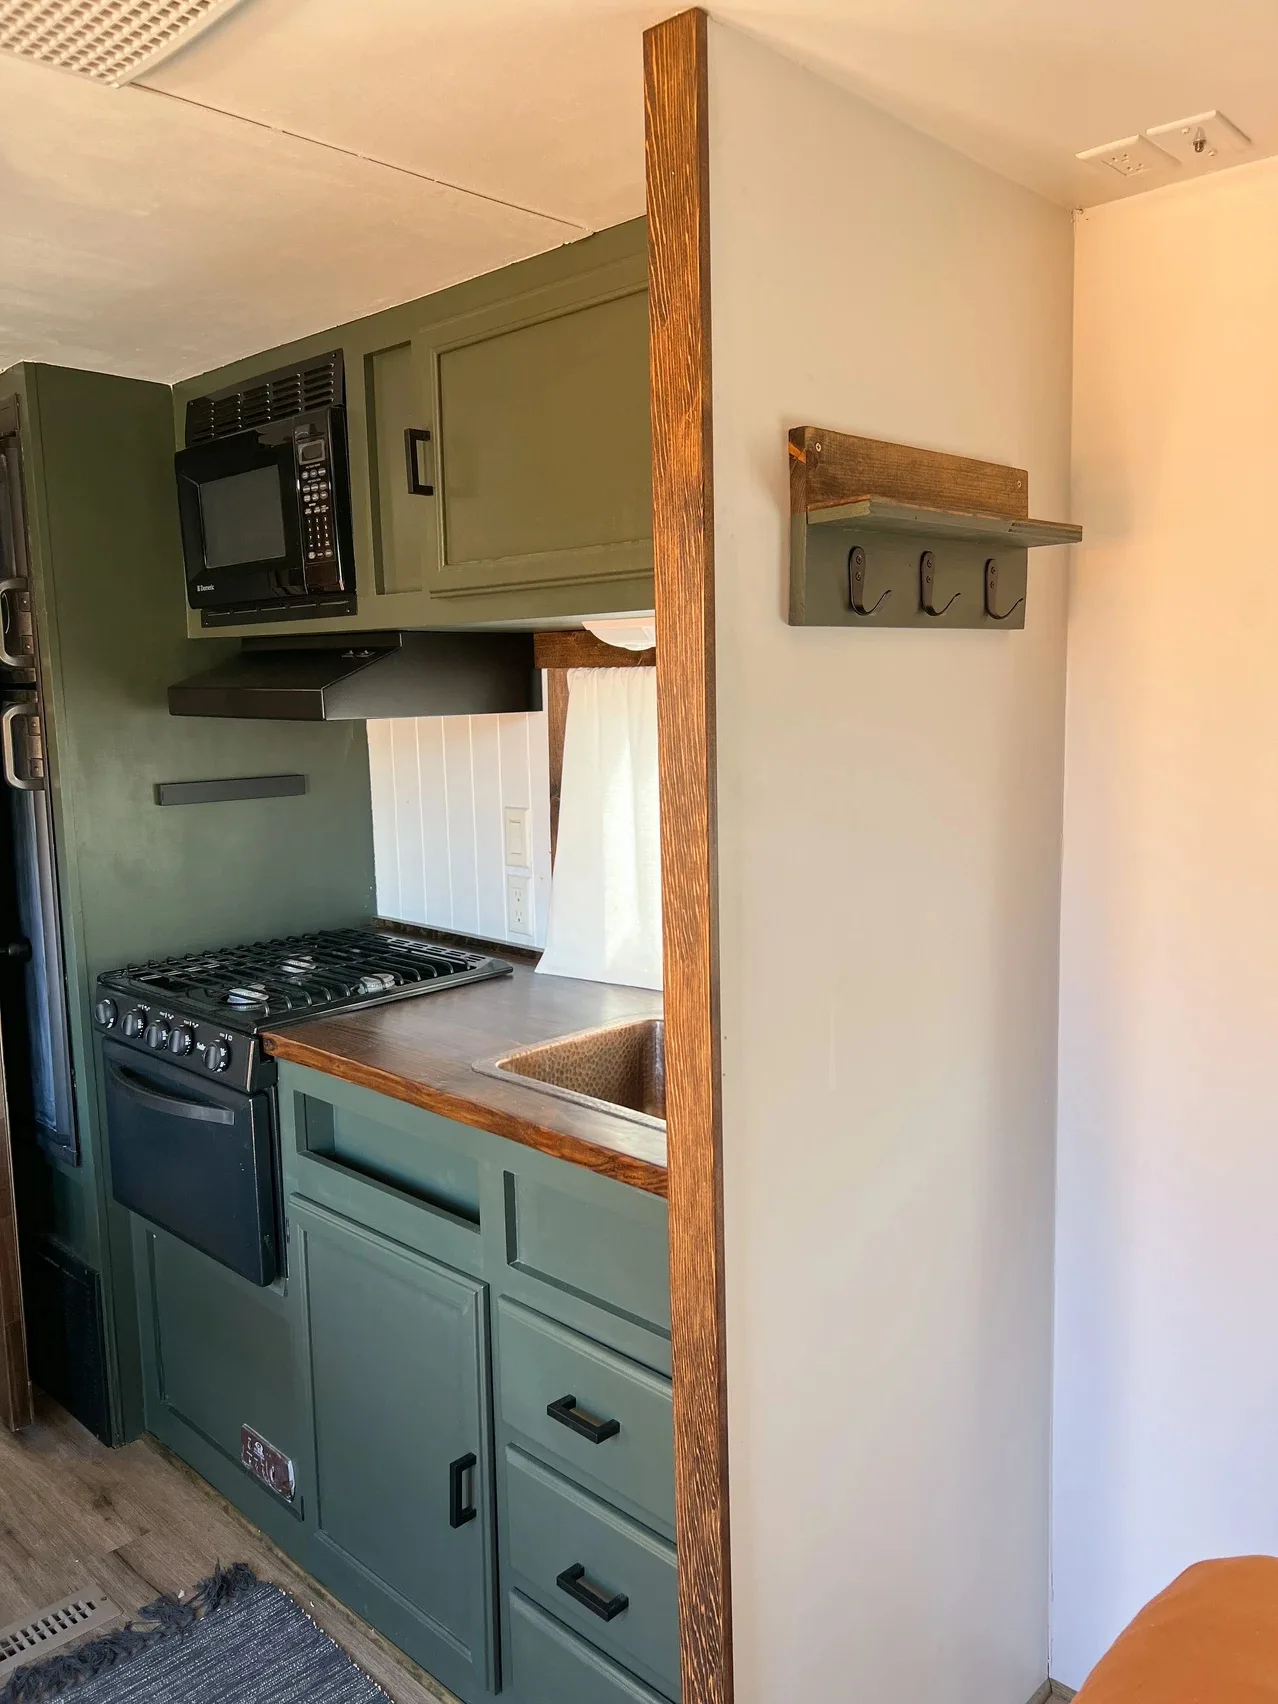 inside the kitchen in the renovated camper